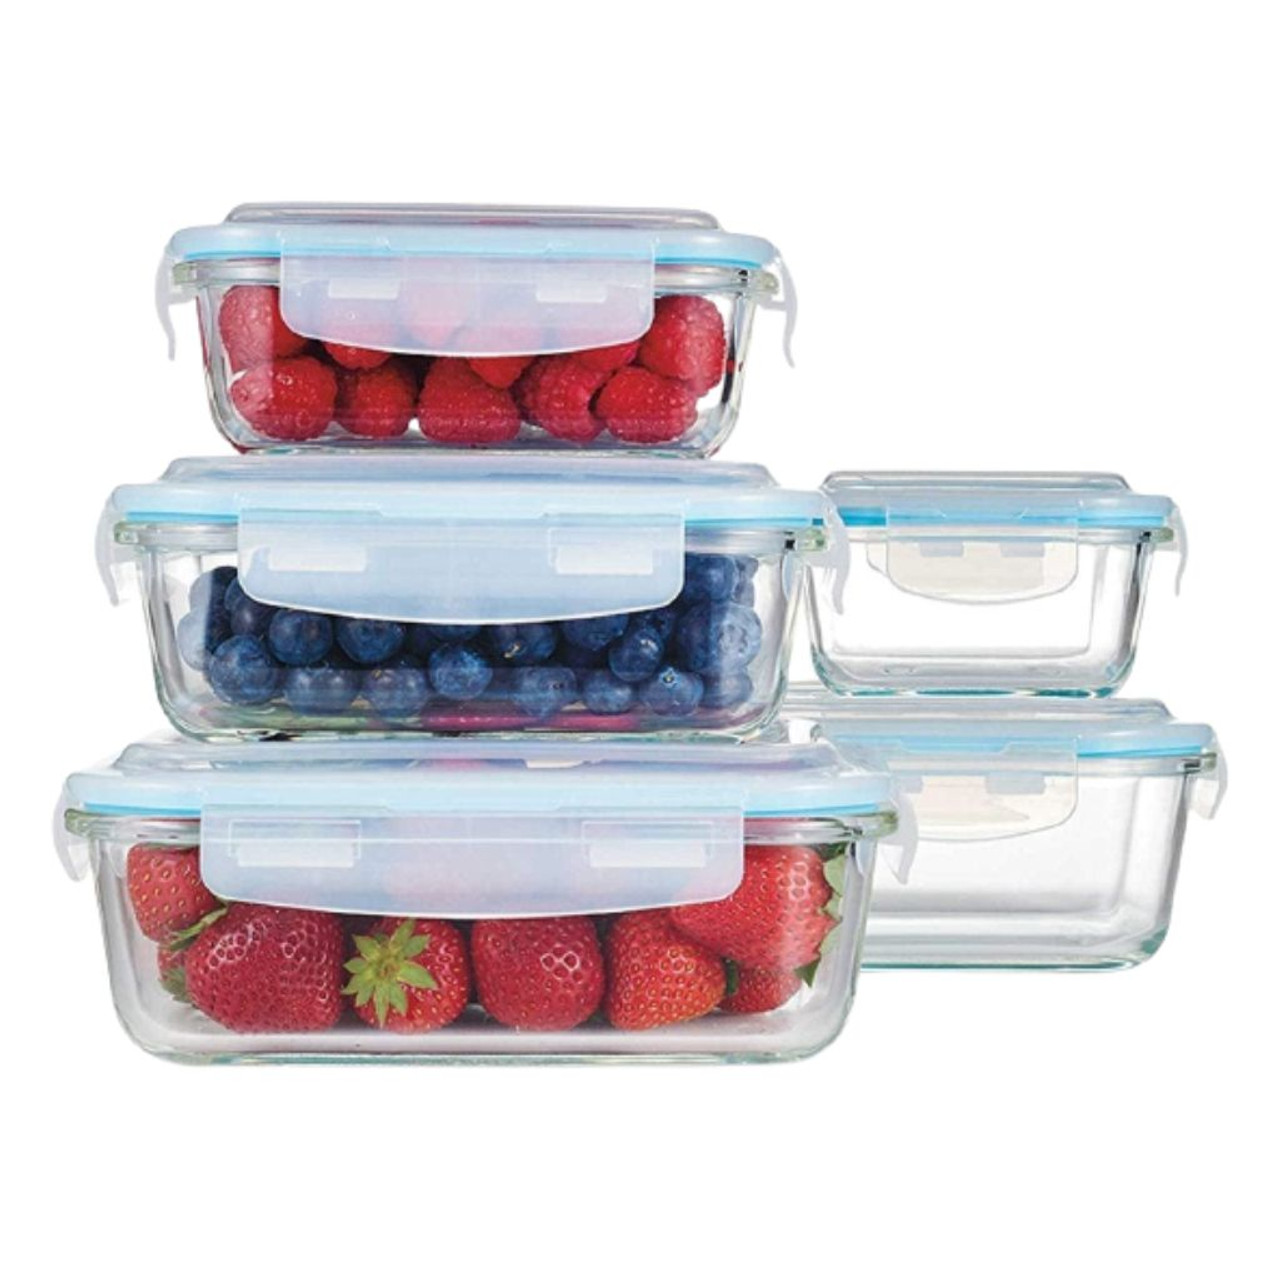 10- or 12-Piece Glass Food Storage Container Set with Locking Lids product image